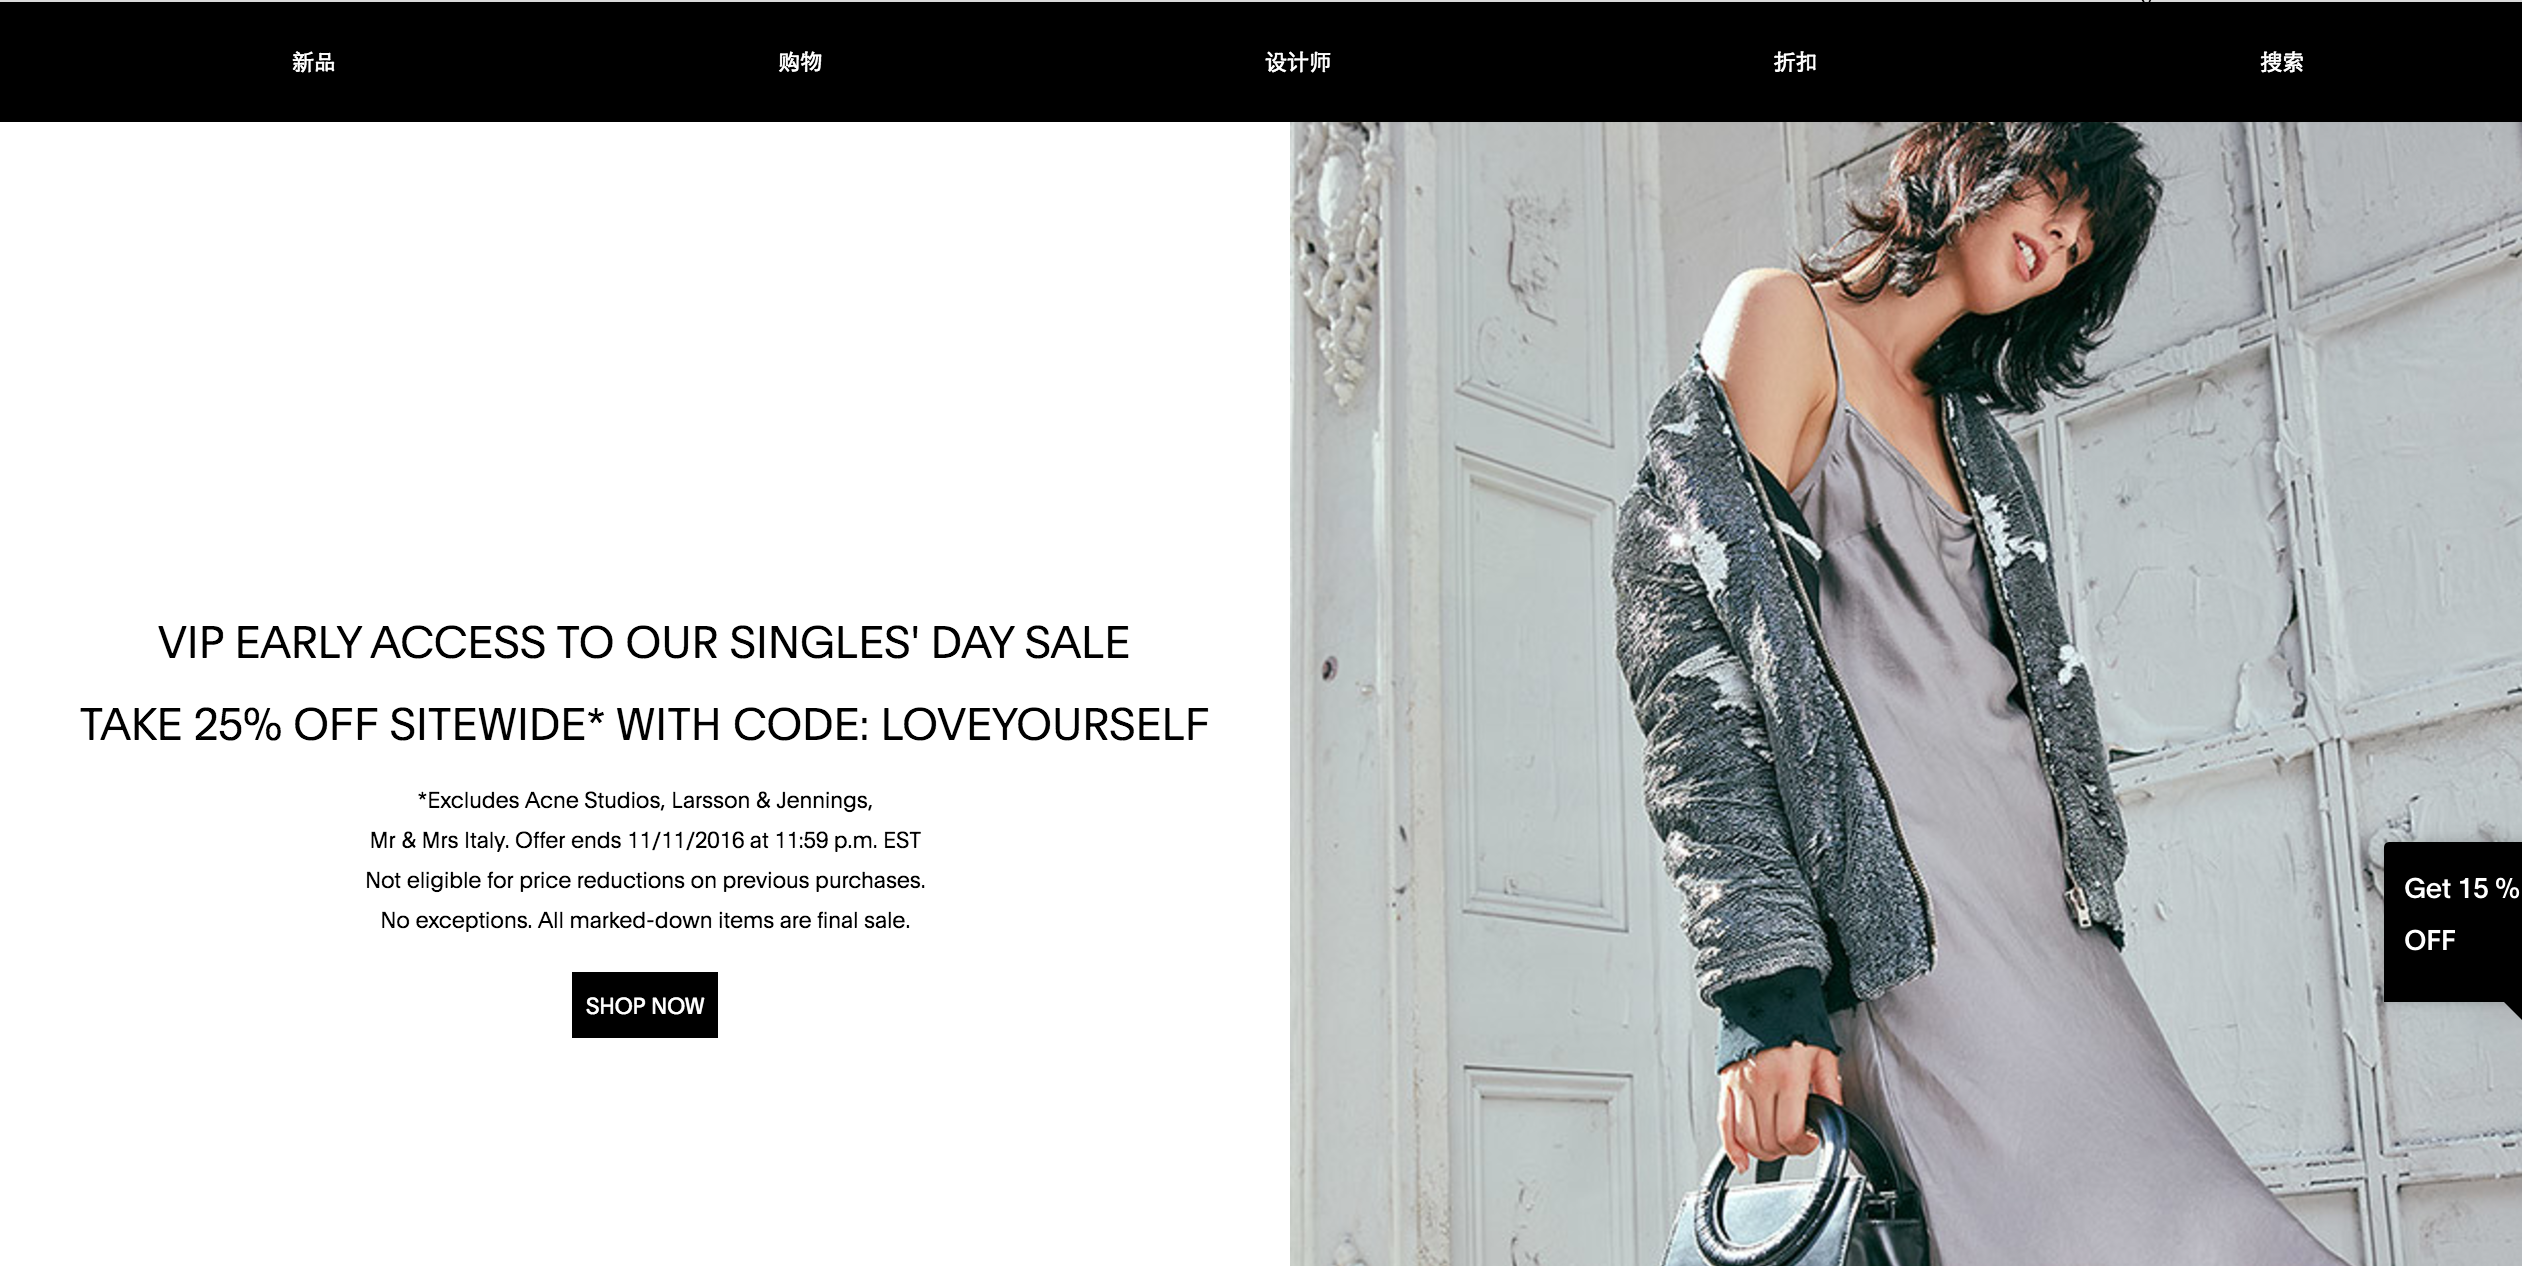 A Singles' Day promotion by luxury retailer Otte. 